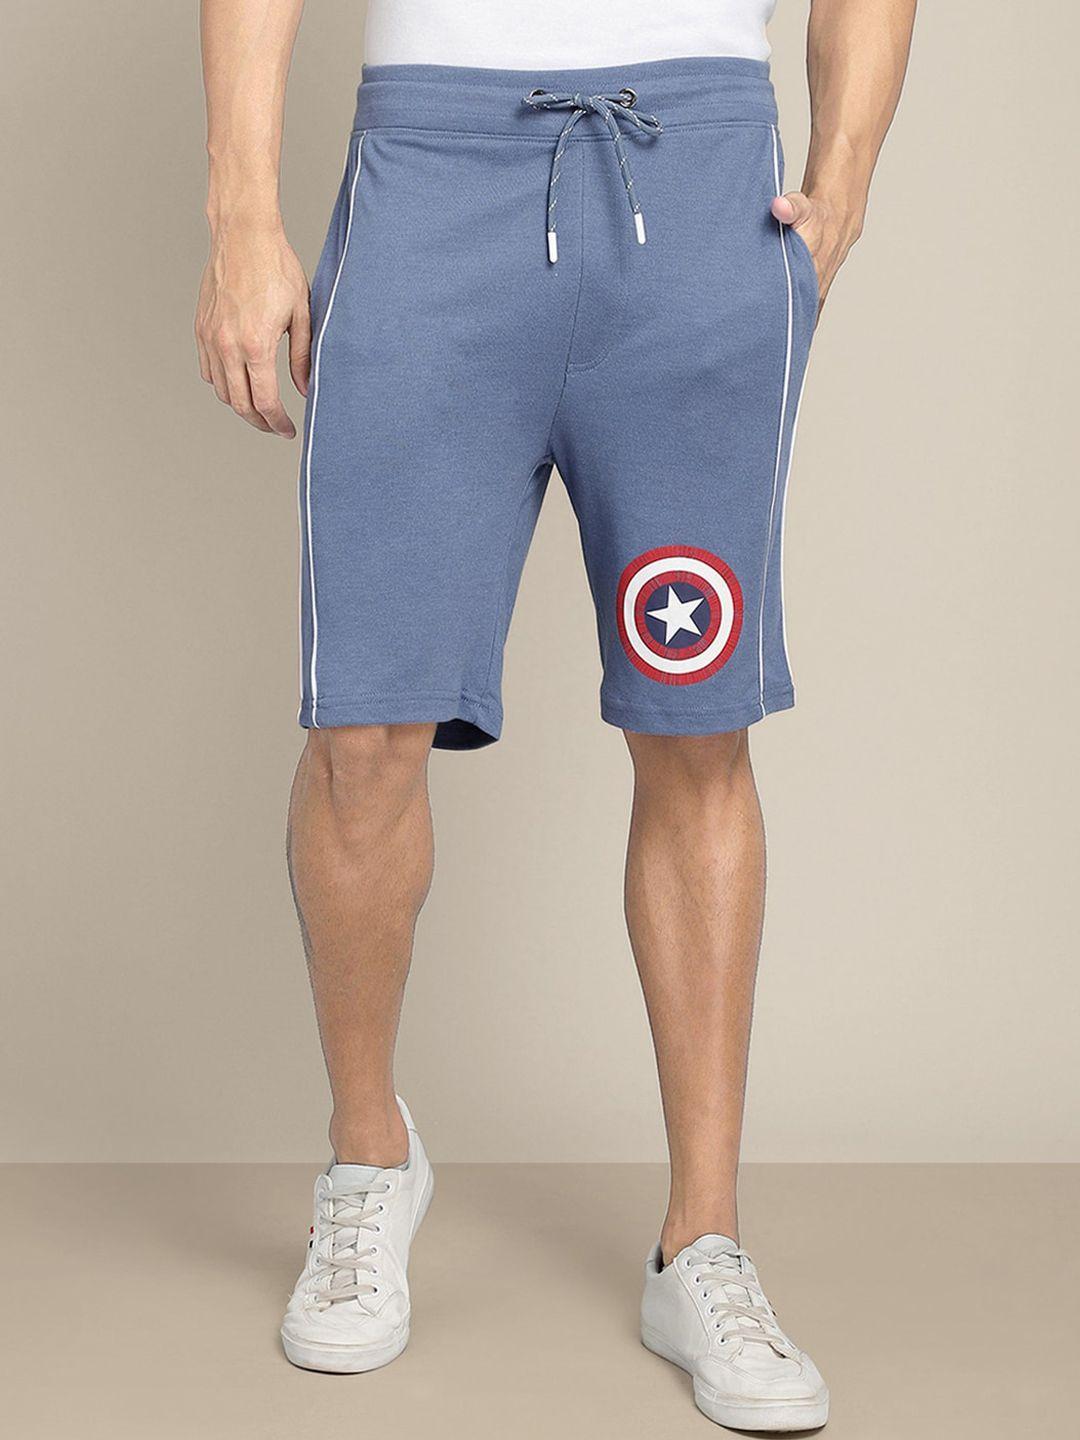 free authority printed captain america shorts